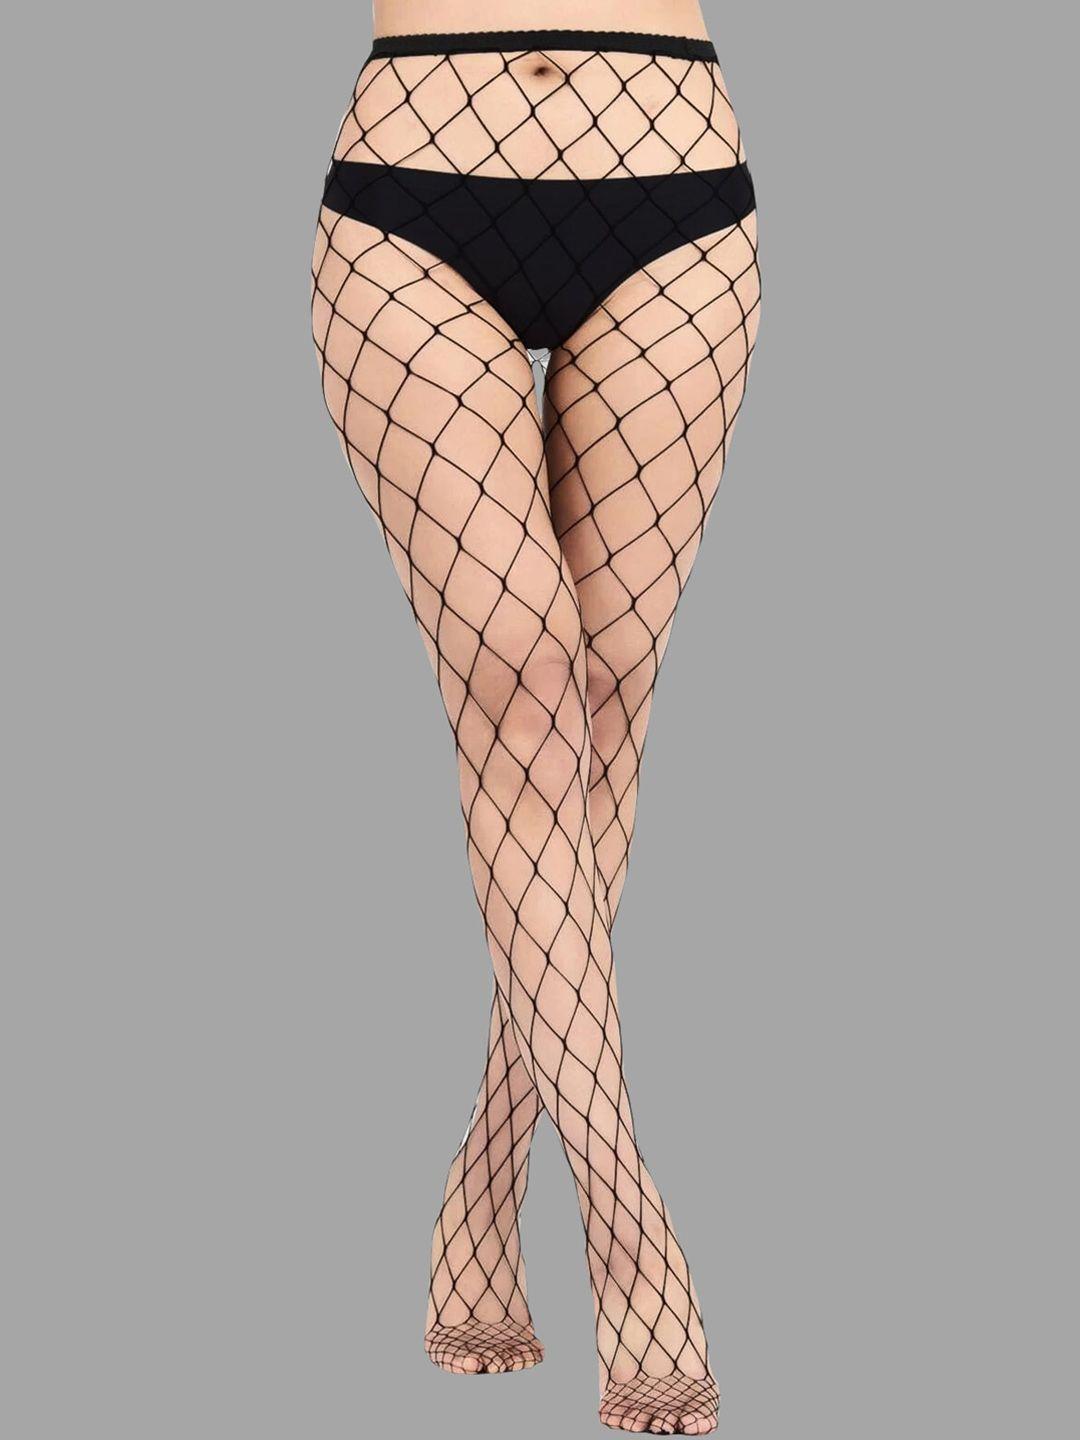 color style high-rise sheer fish net stockings